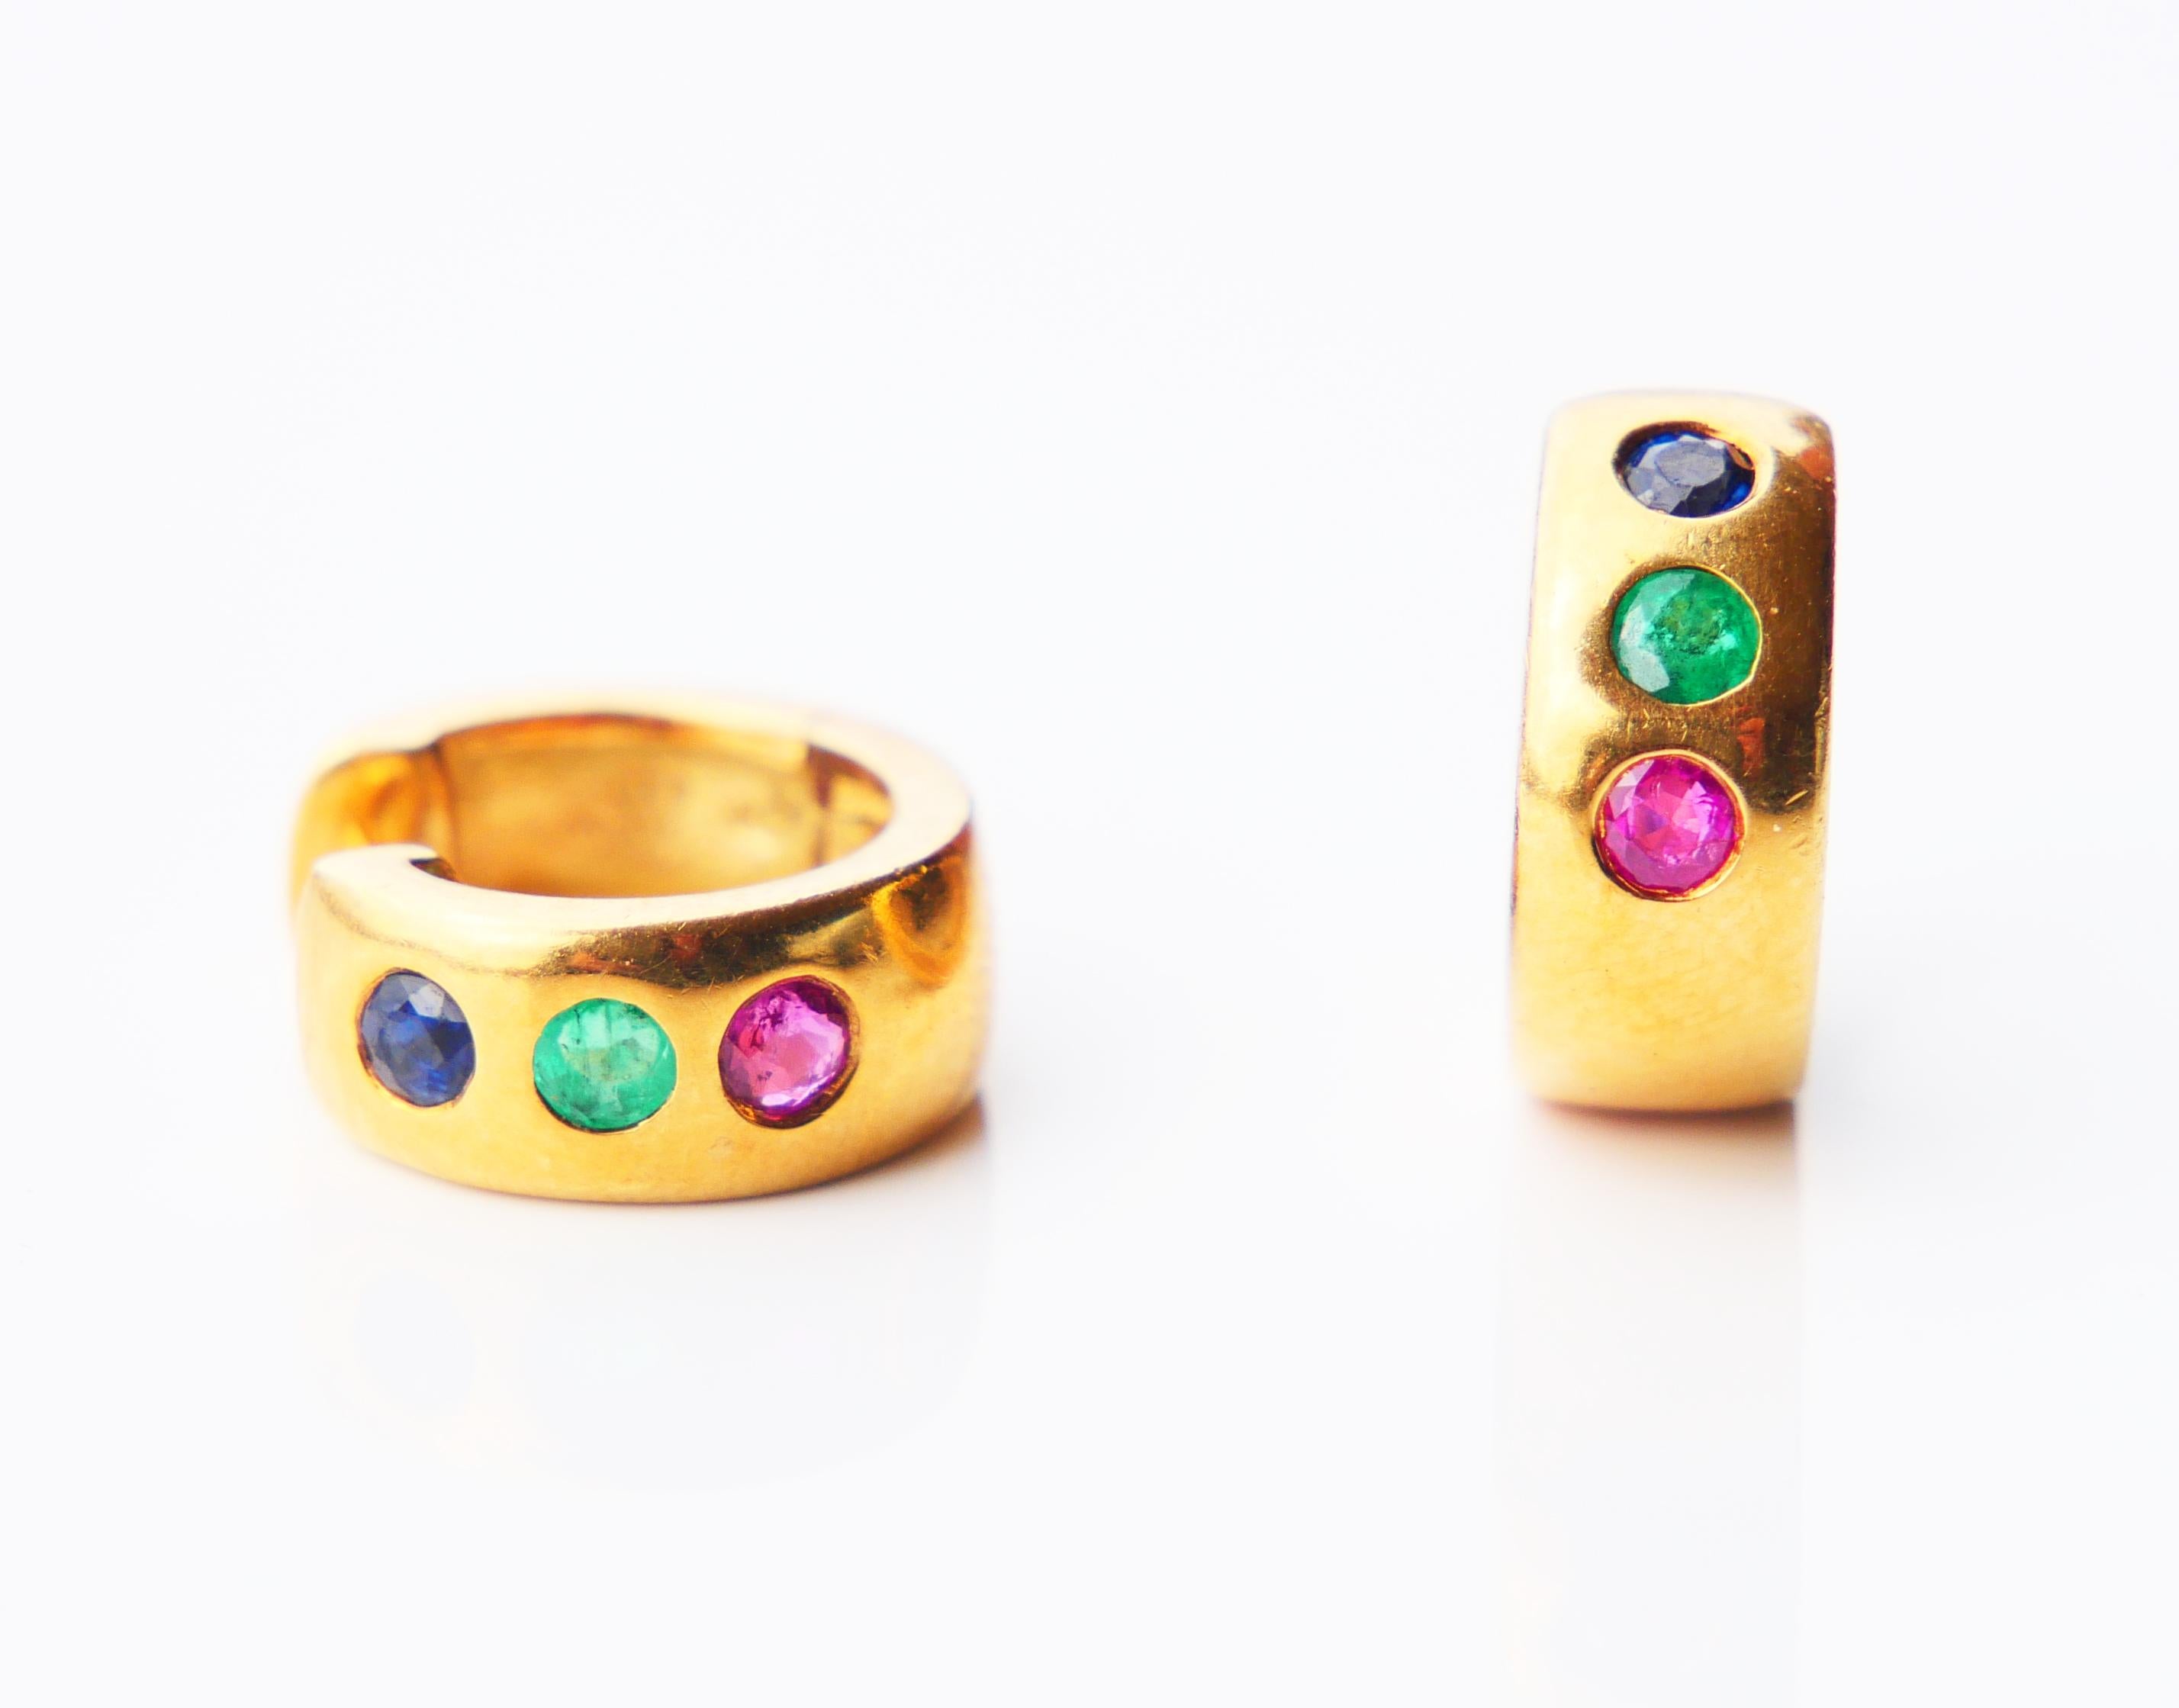 A pair of fine Three Stones studs from ca. 1960s -1970s in solid 18K Yellow featuring old diamond cut natural Blue Sapphires, Green Emeralds, and Red Rubies Ø x 2.5 mm each / ca. 0.1 ct each.

Each earring Ø 13 mm x 5 mm wide.

Both hallmarked 750